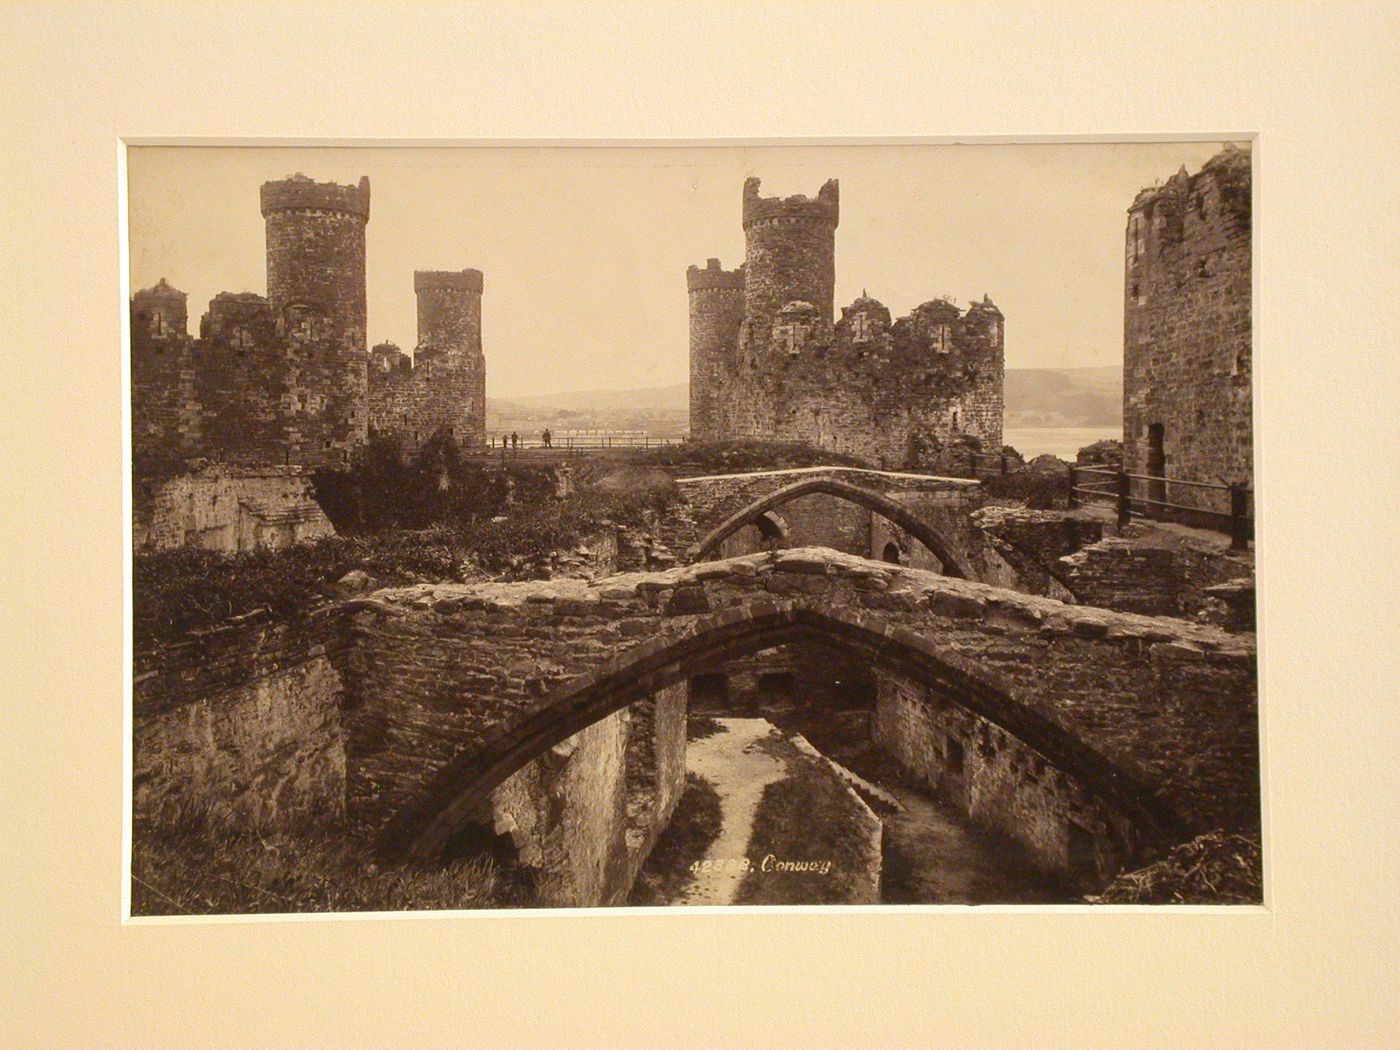 View of ruined castle, Conway, Wales